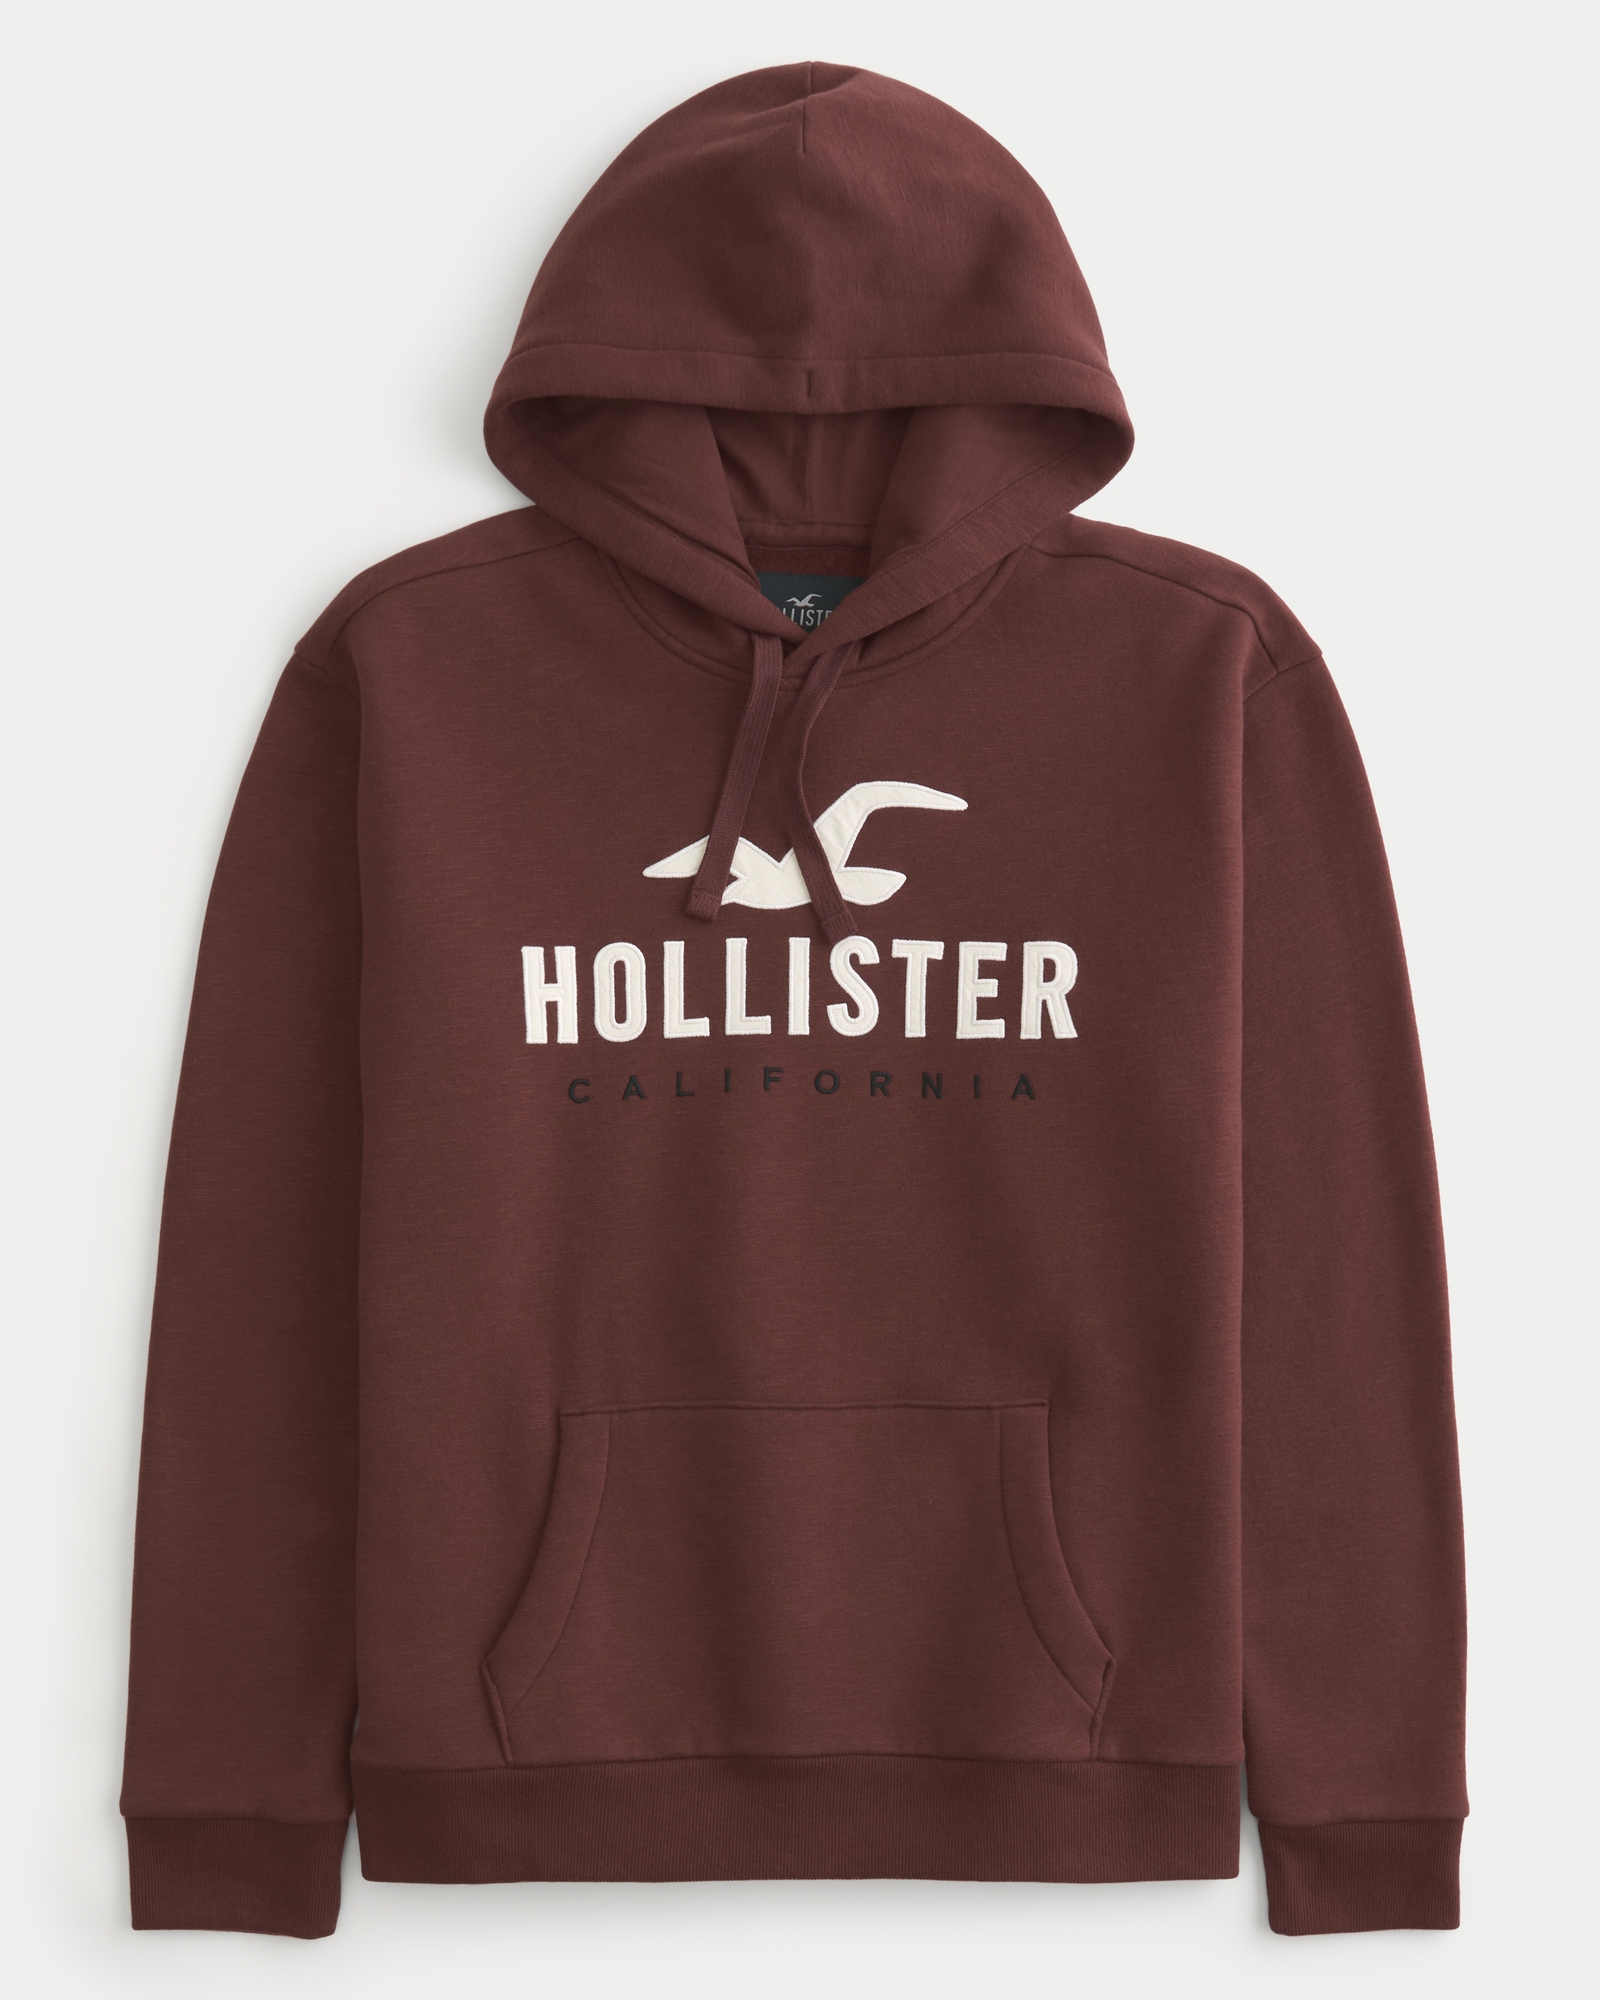 Hollister California Hoodie in Green with Script Logo Men's Size